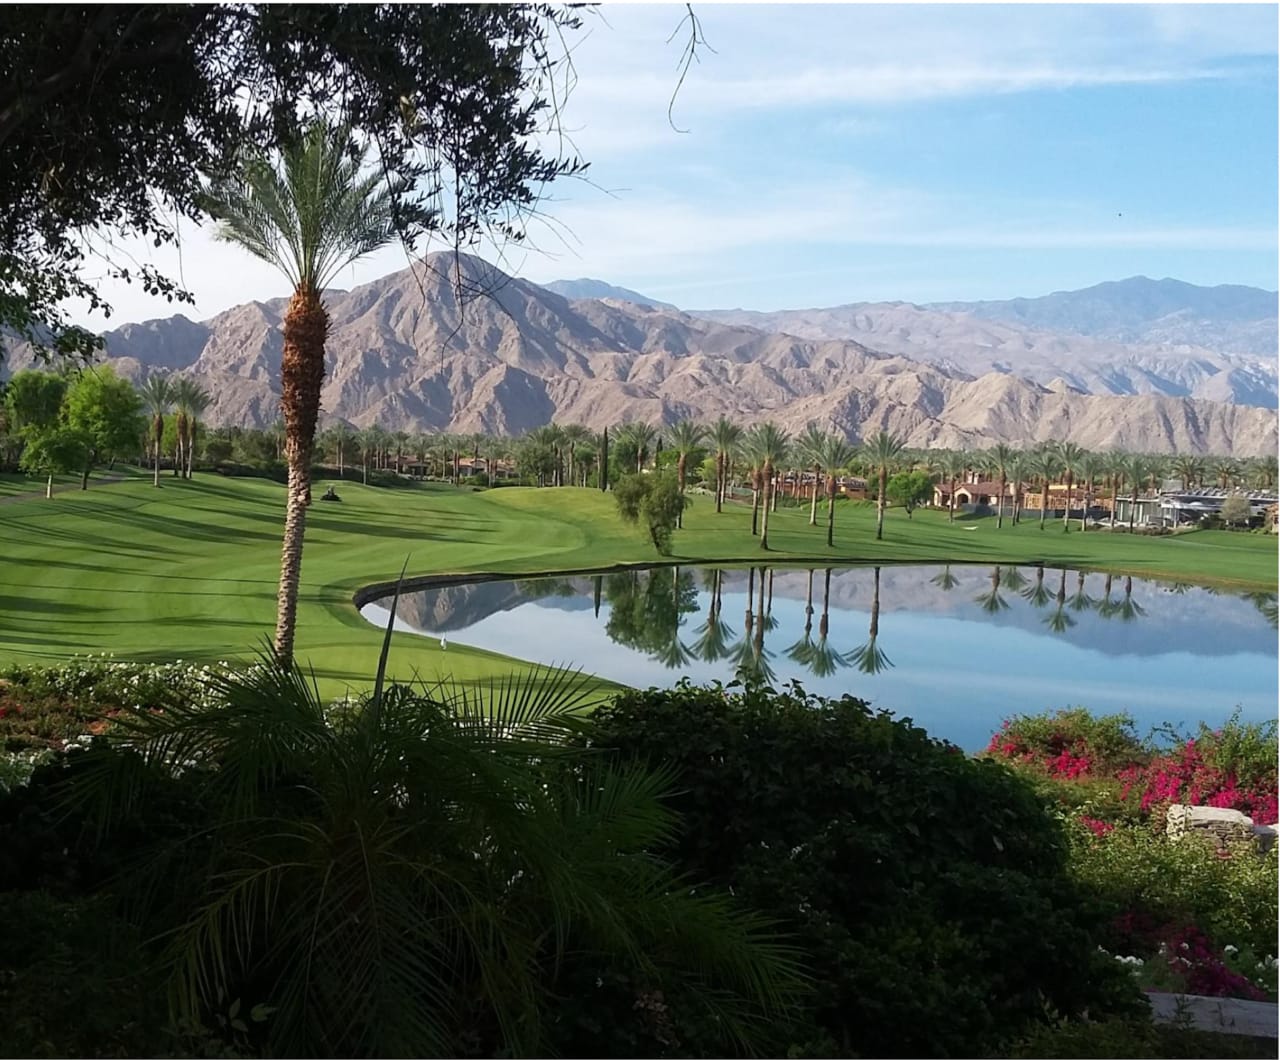 GREATER PALM SPRINGS HOUSING REPORT